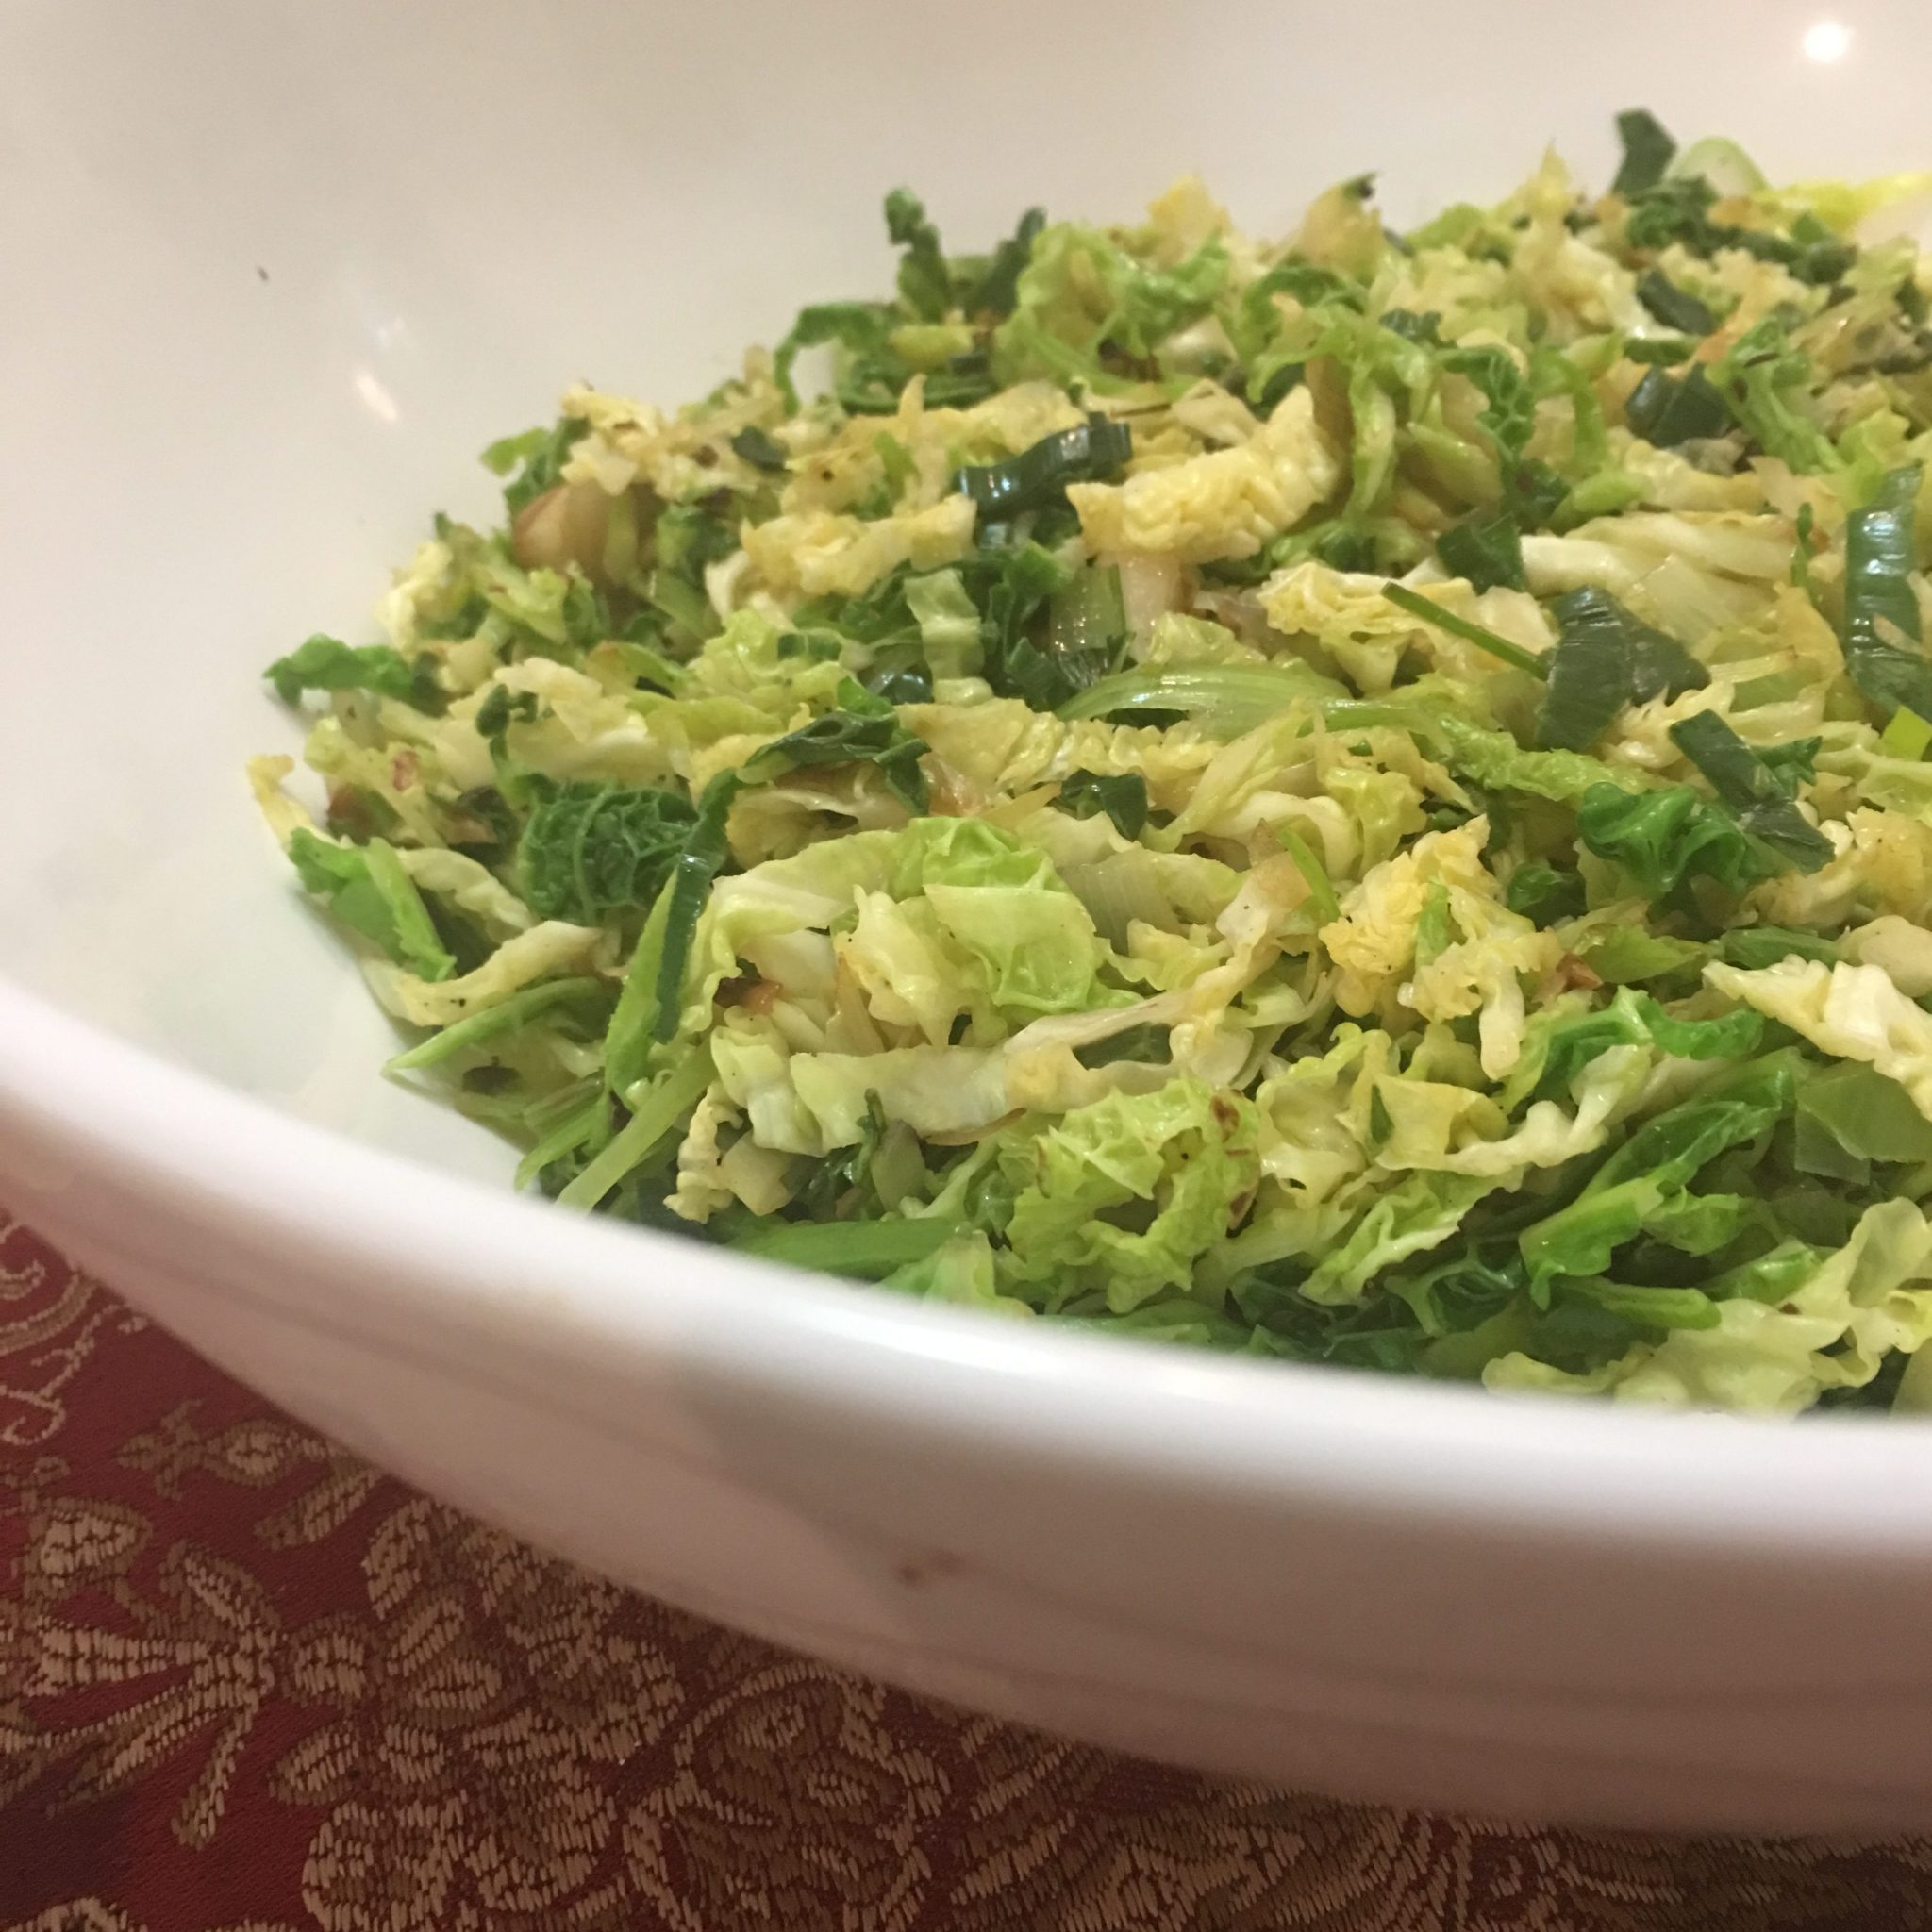 Big white ceramic bowl of sauteed leeks and cabbage, viewed from the side